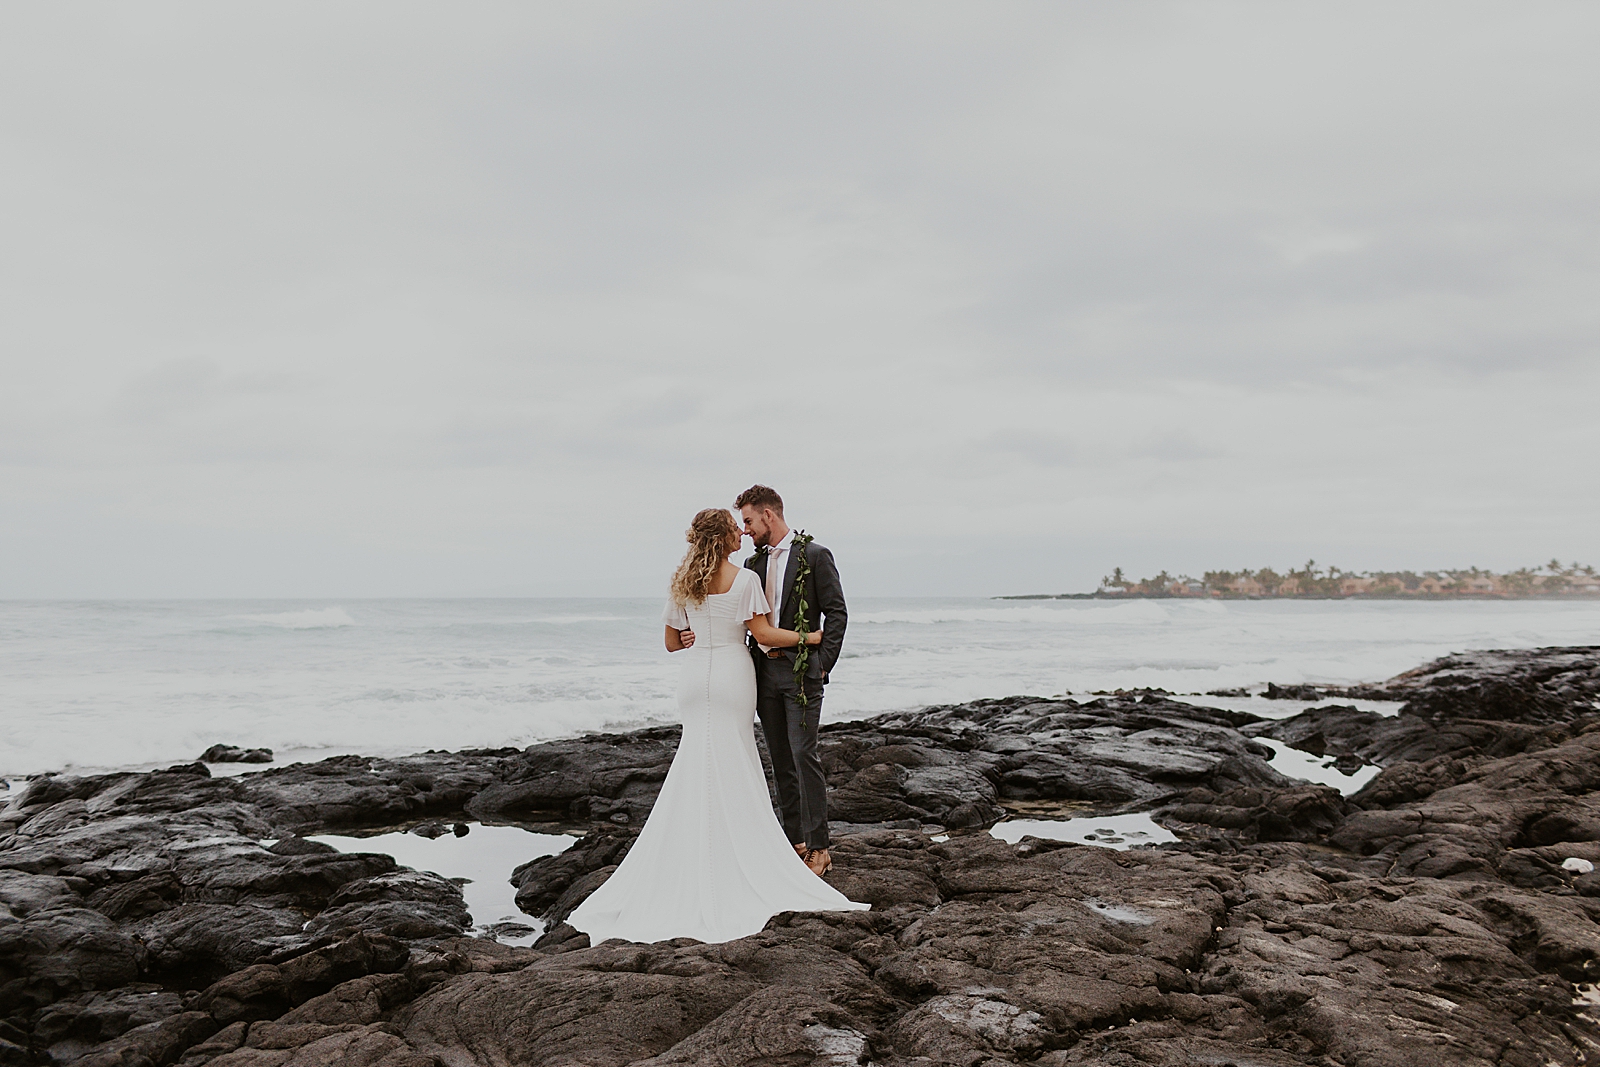 Bride and Groom holding each other standing on rocks by the ocean